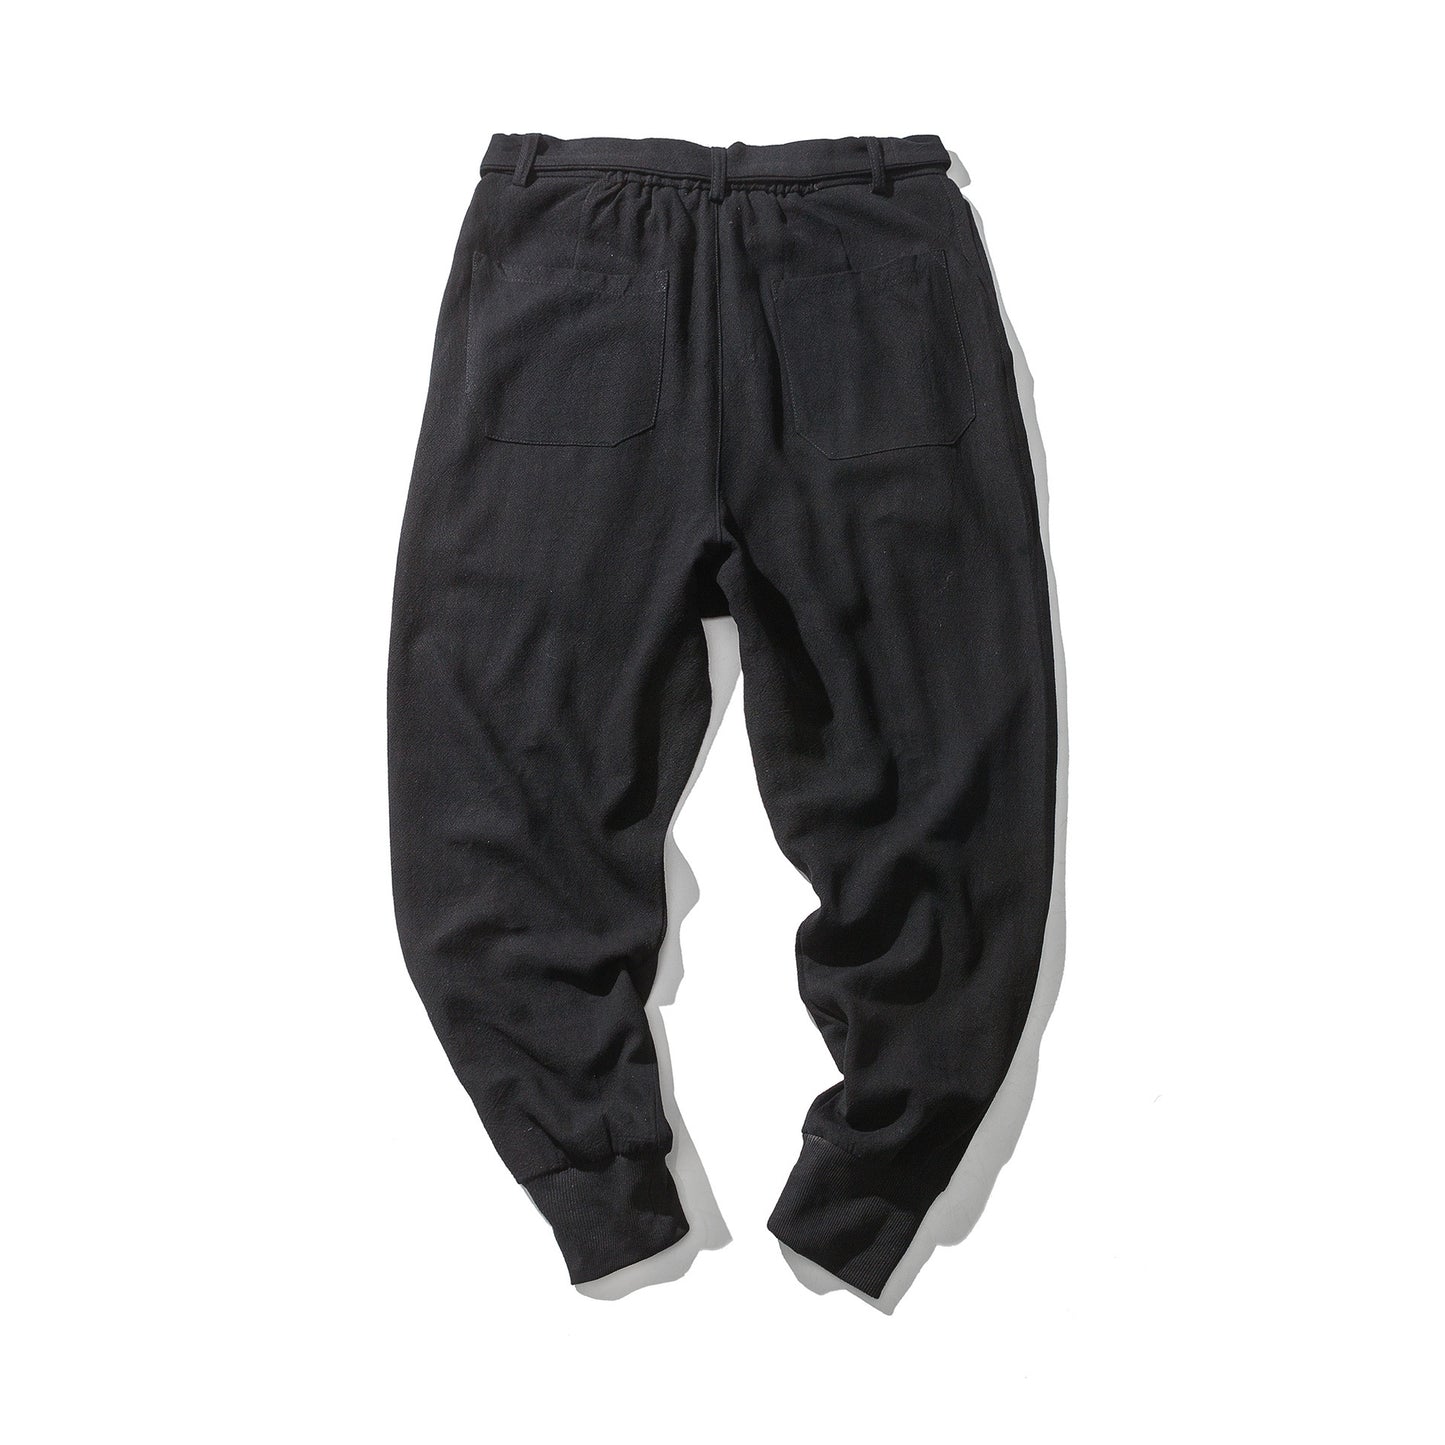 Japanese cotton and linen beam pants